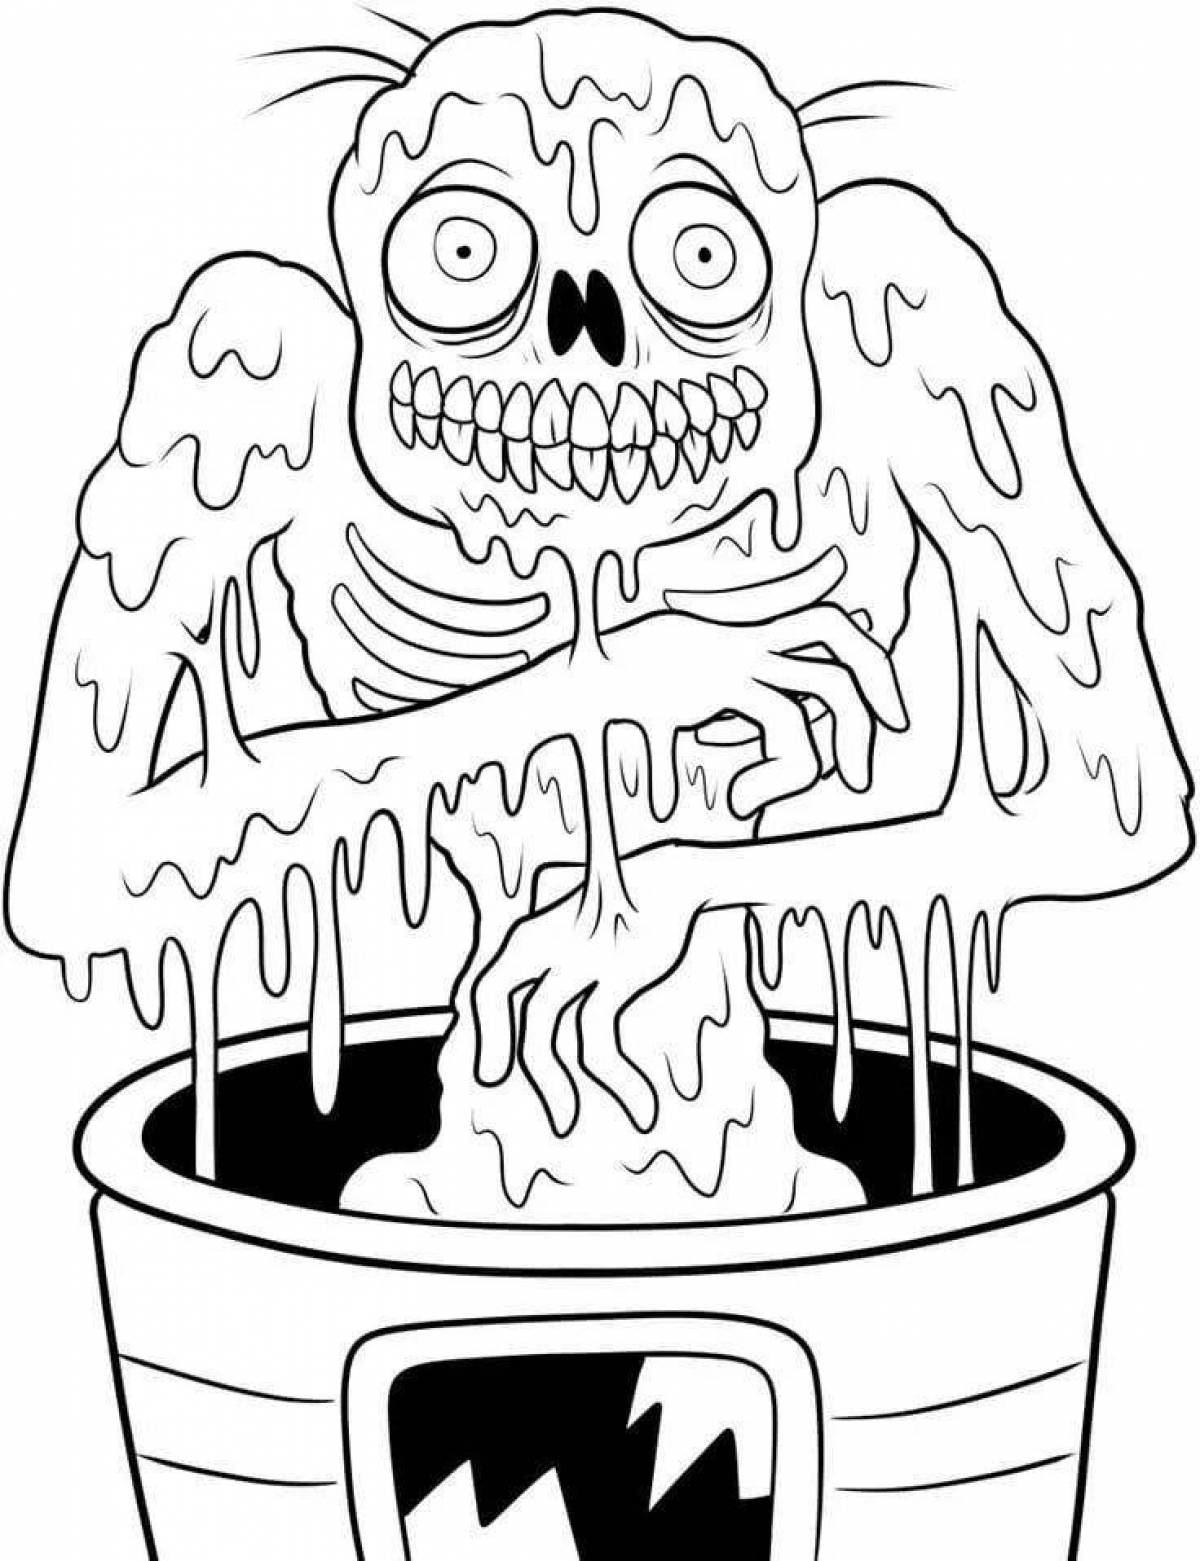 Creepy horror coloring pages